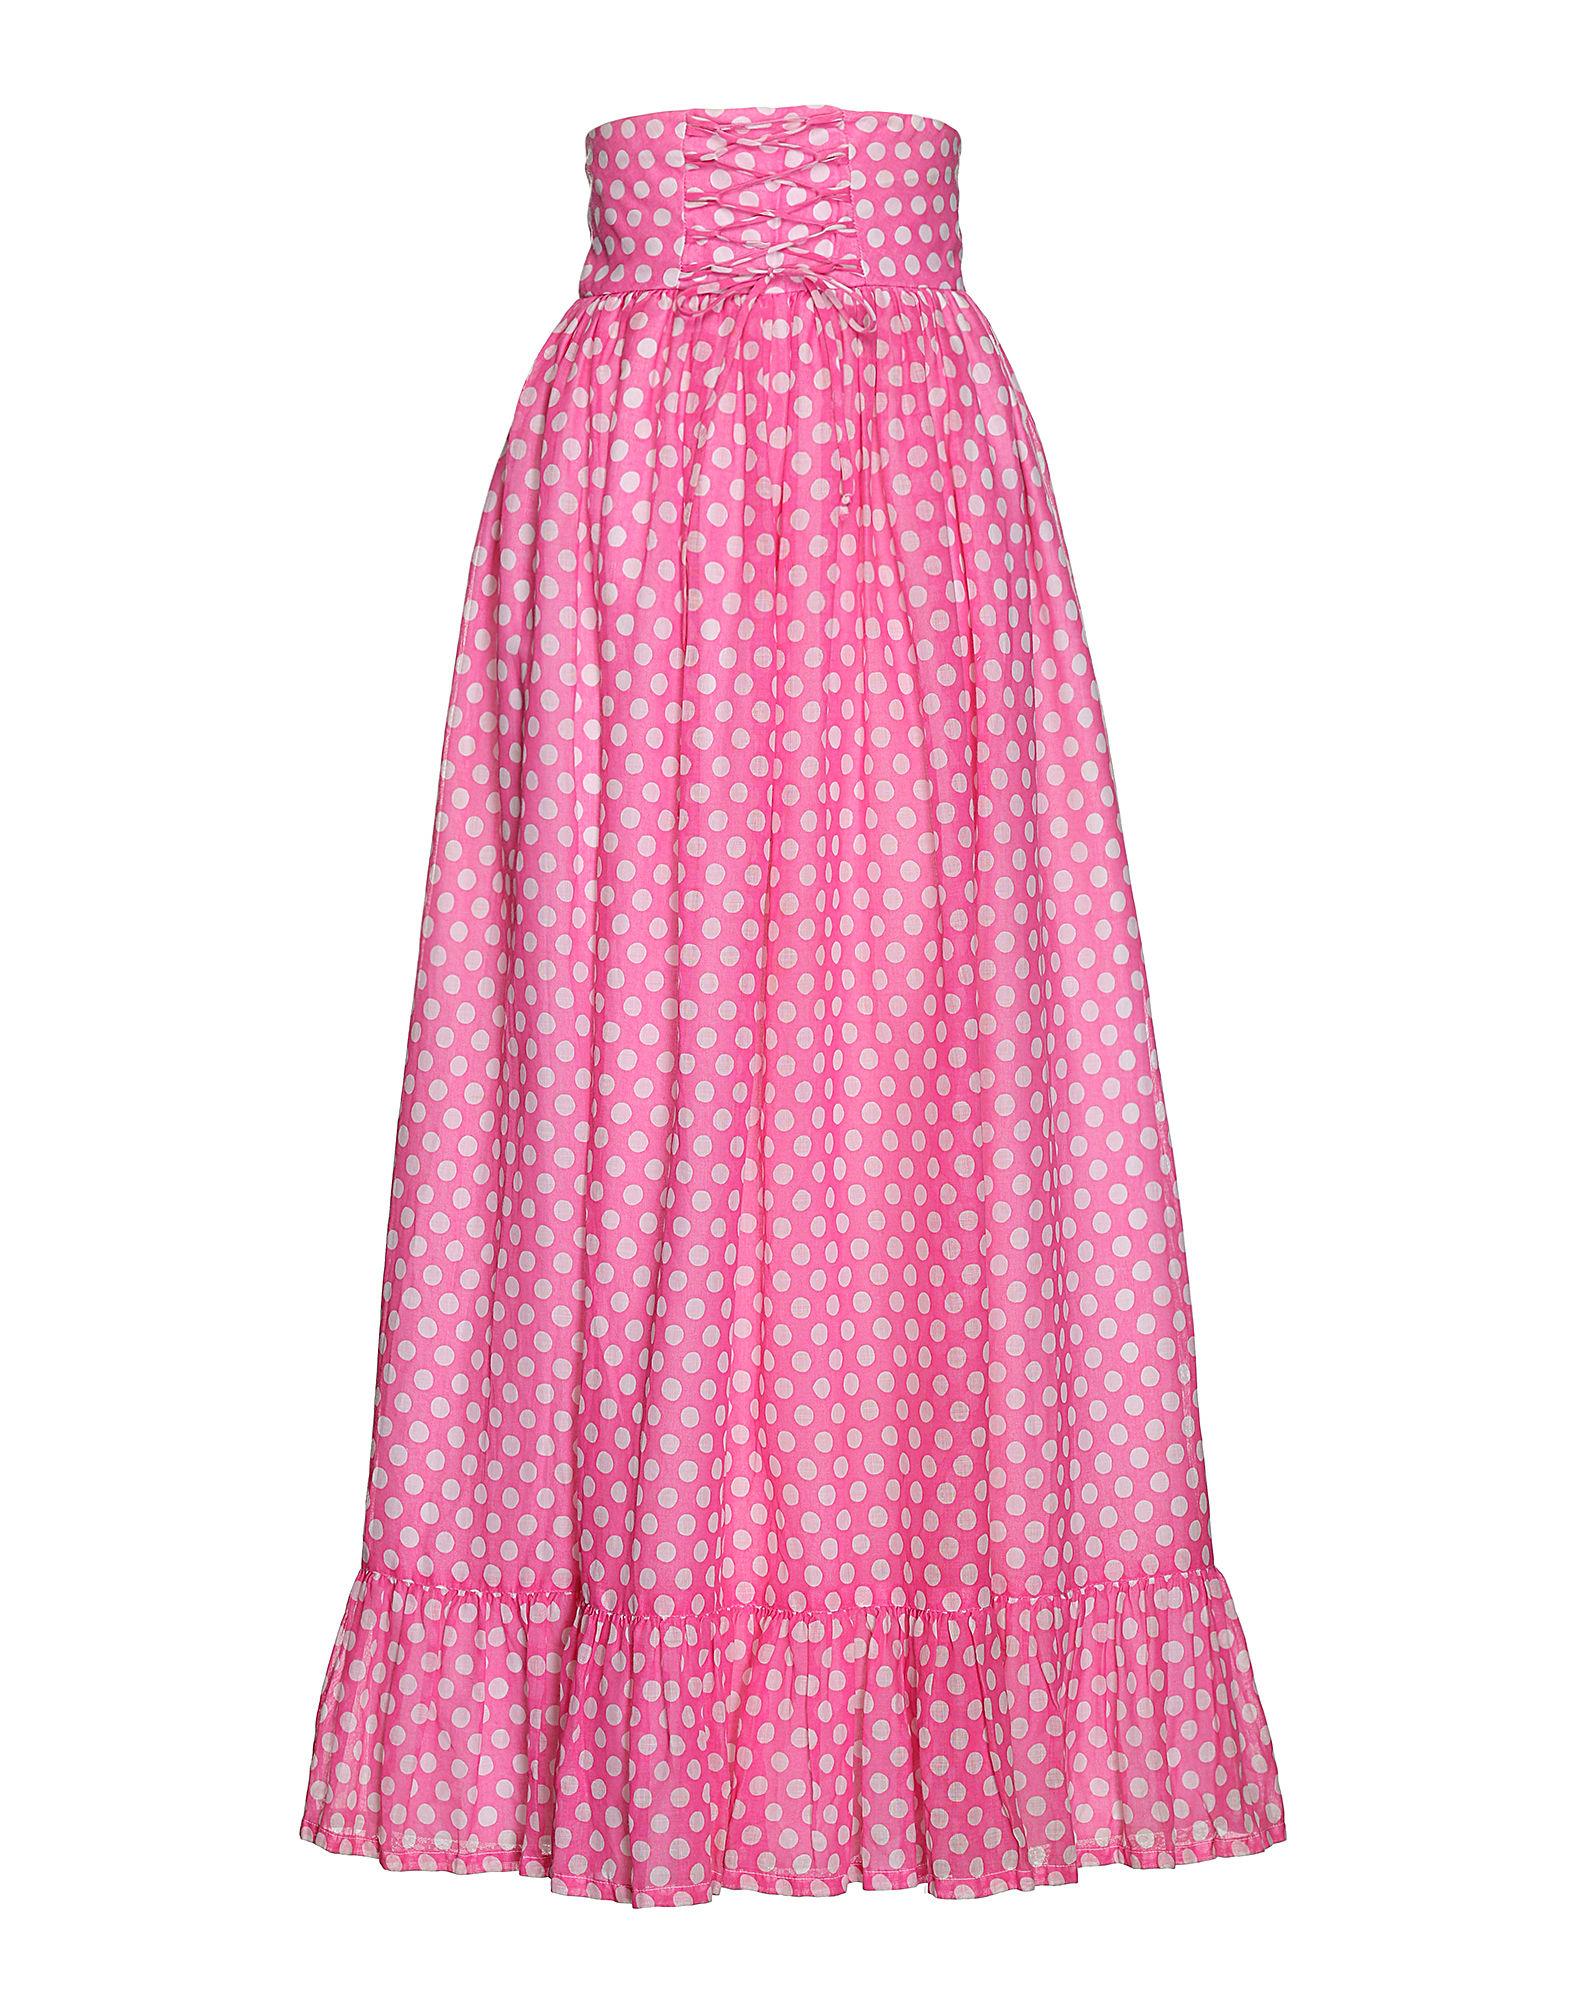 La Double J Pink Cotton Polka-dotted Skirt - Lyst